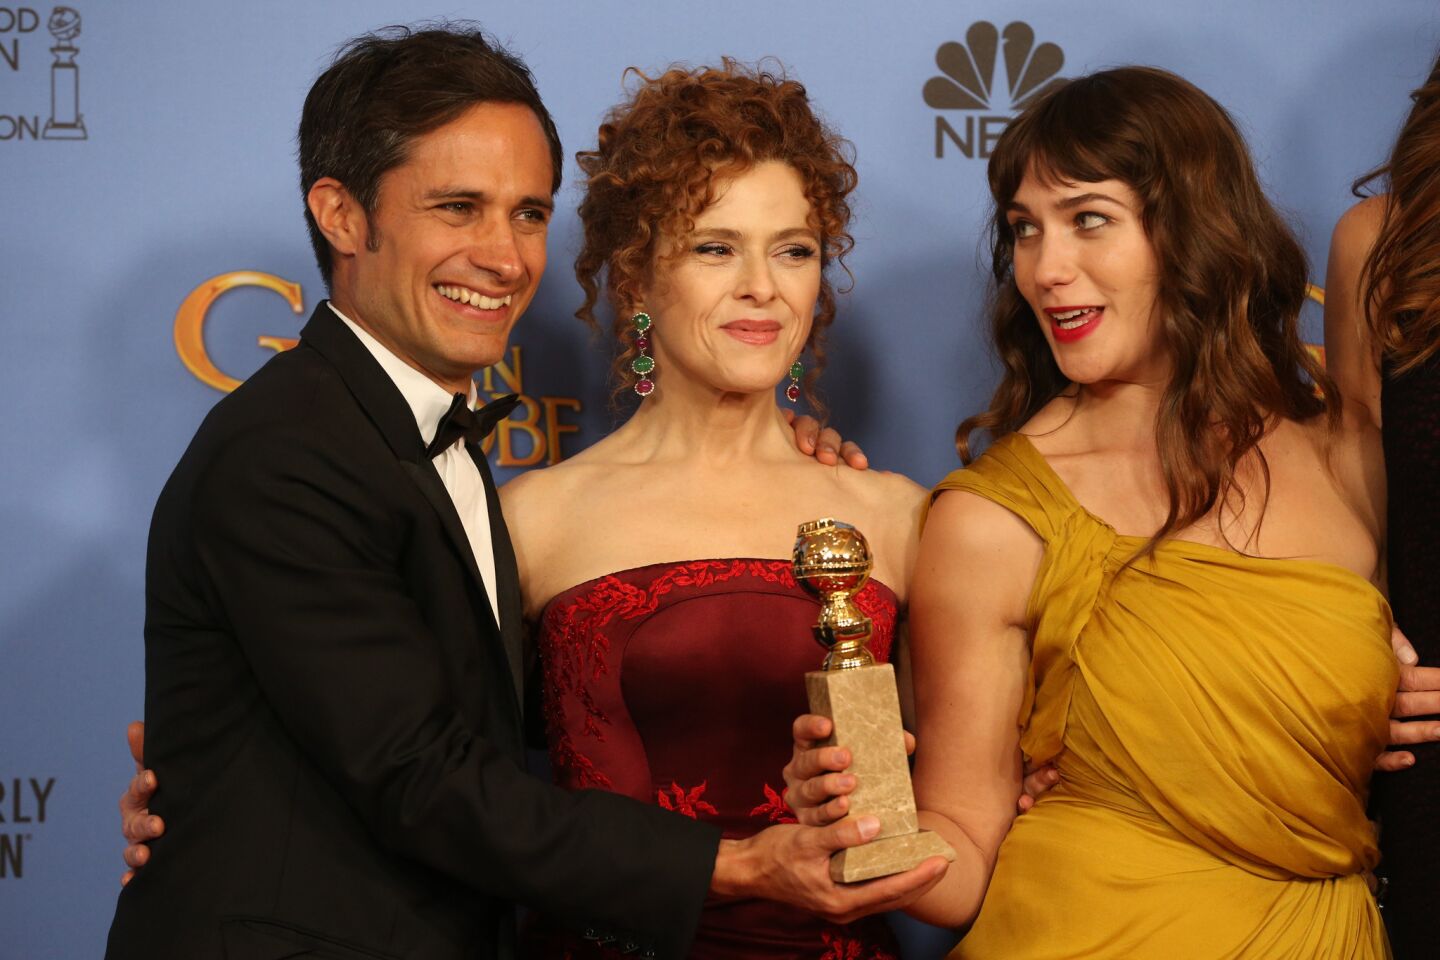 Gael Garcia Bernal, Bernadette Peters and Lola Kirke share the Golden Globe for TV series comedy for "Mozart in the Jungle."